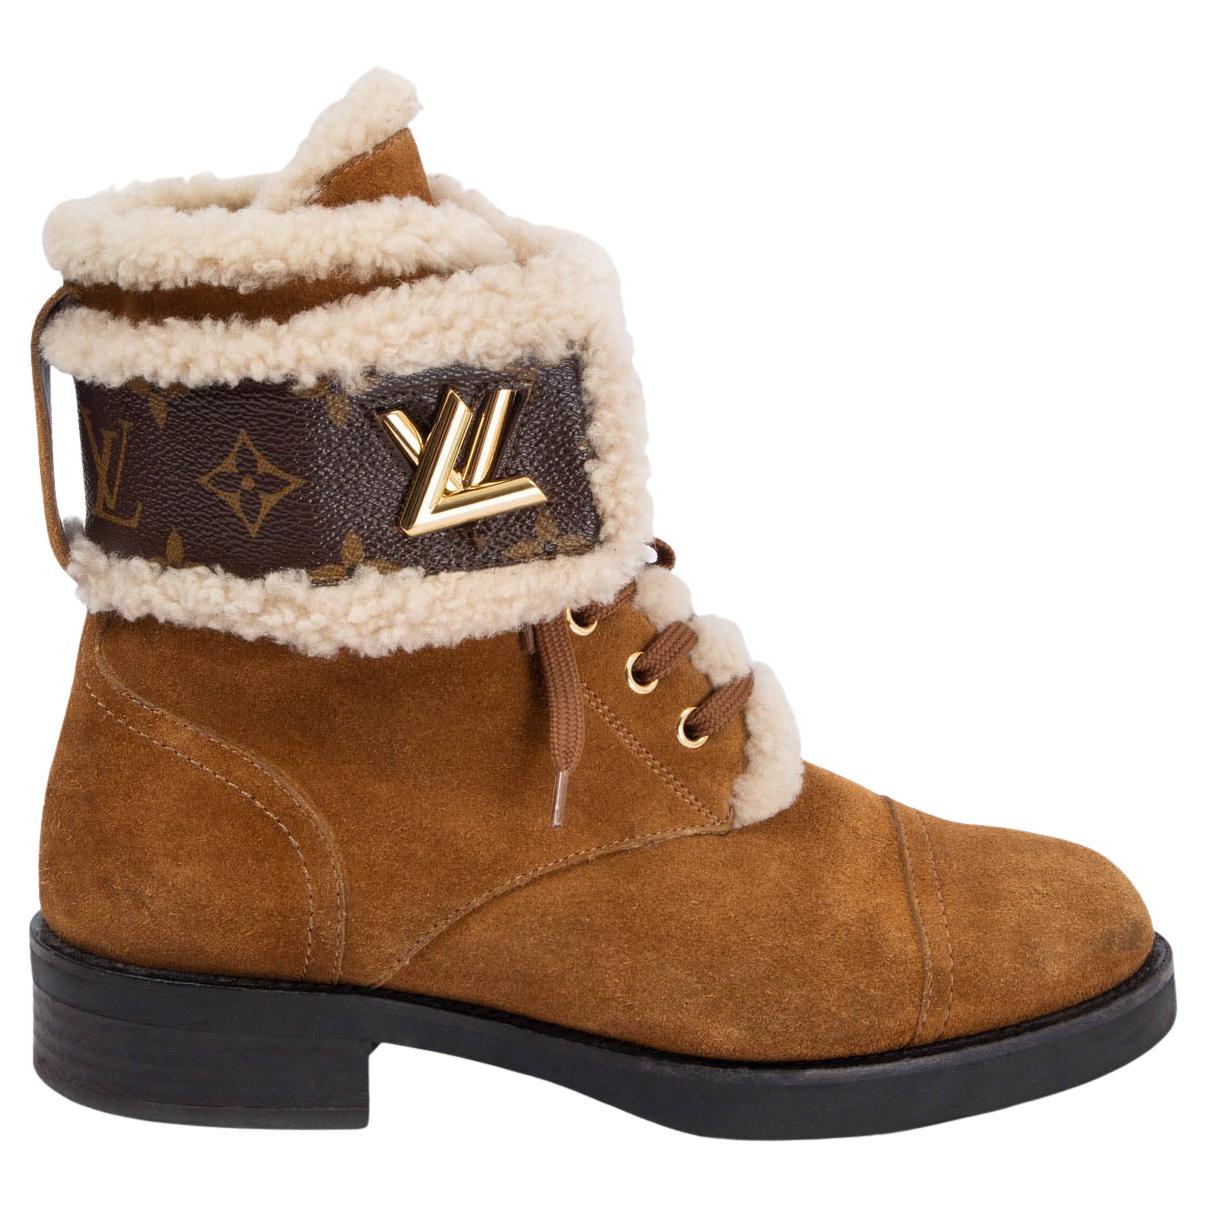 UGG, Shoes, Ugg Lv Suede Boots